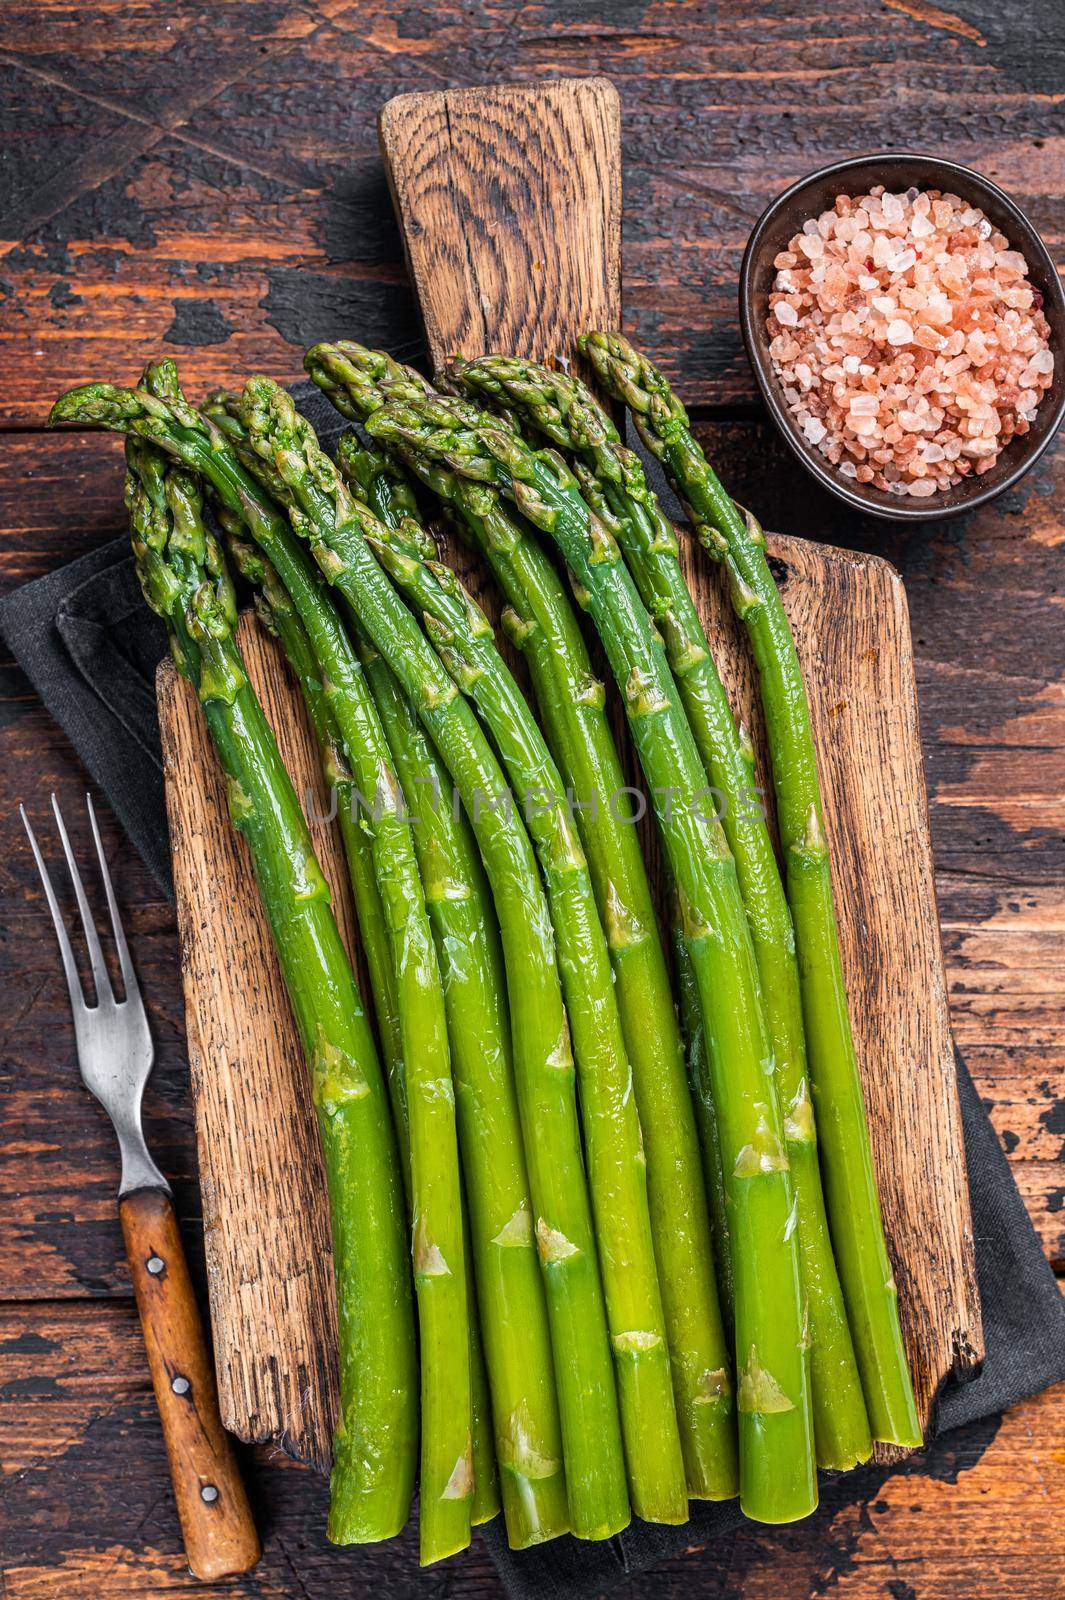 Fresh green asparagus on a wooden cutting board. Dark wooden background. Top view by Composter